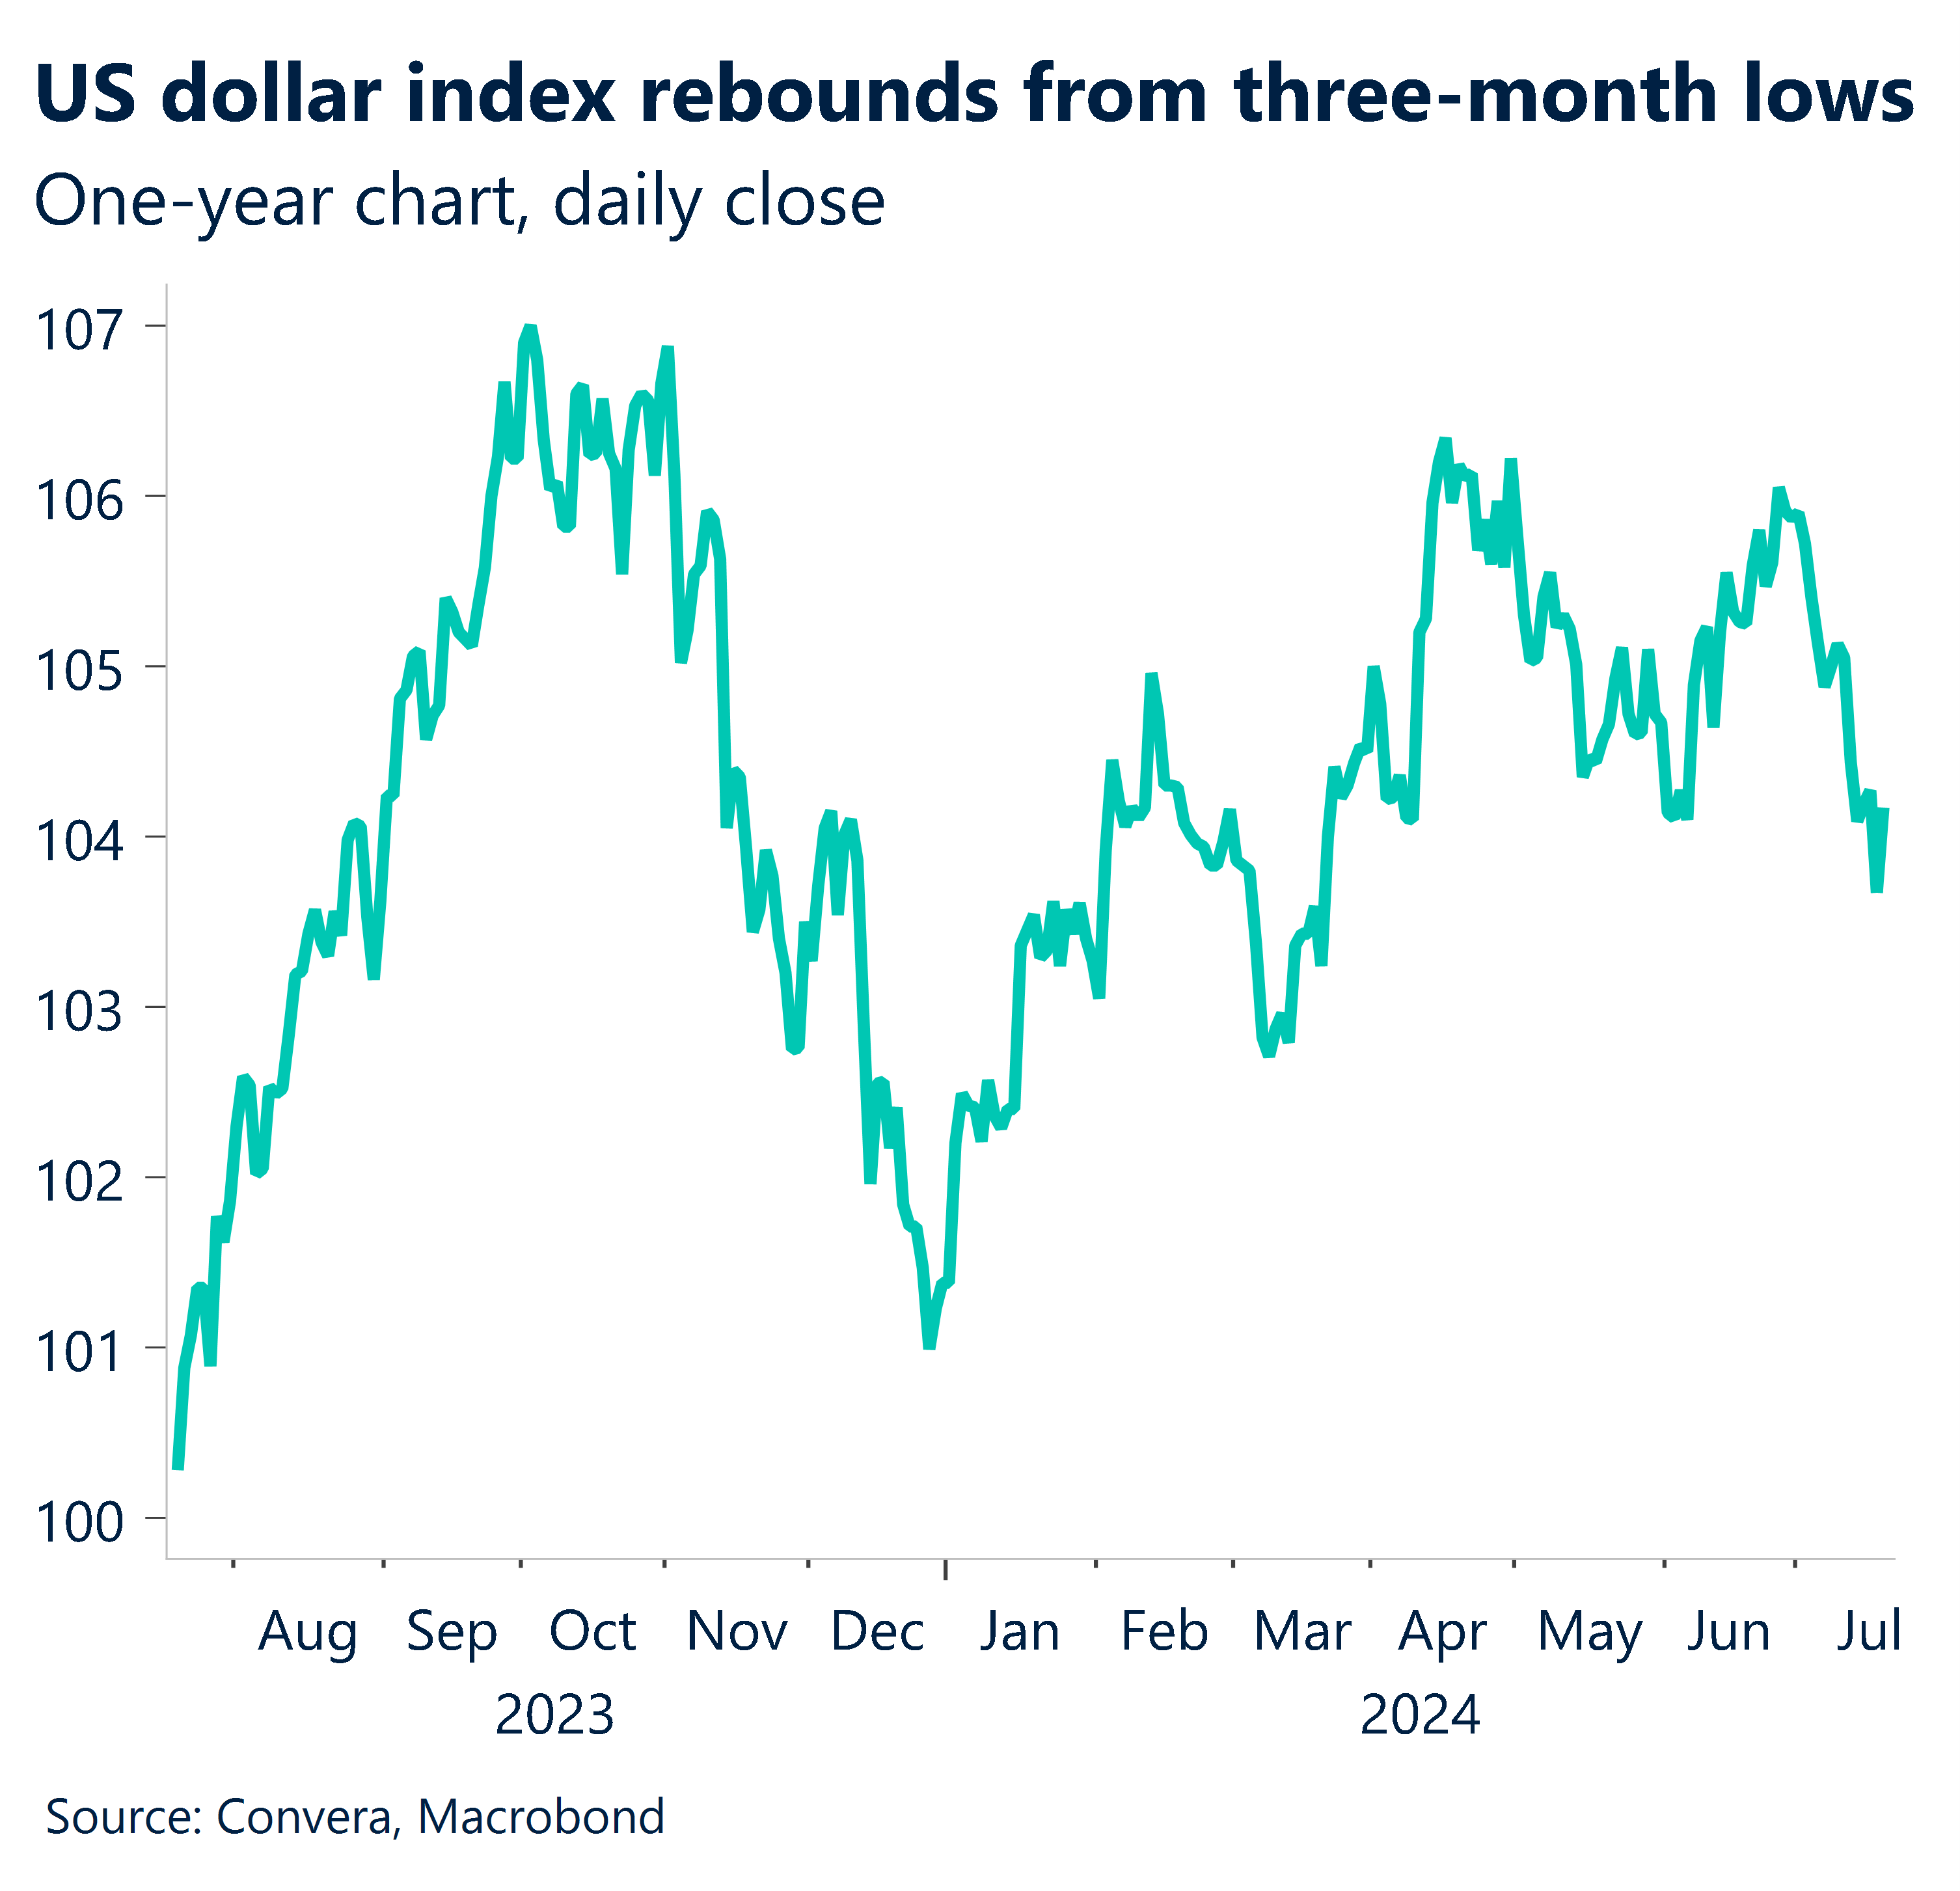 Chart showing US dollar index rebounds from three-month lows